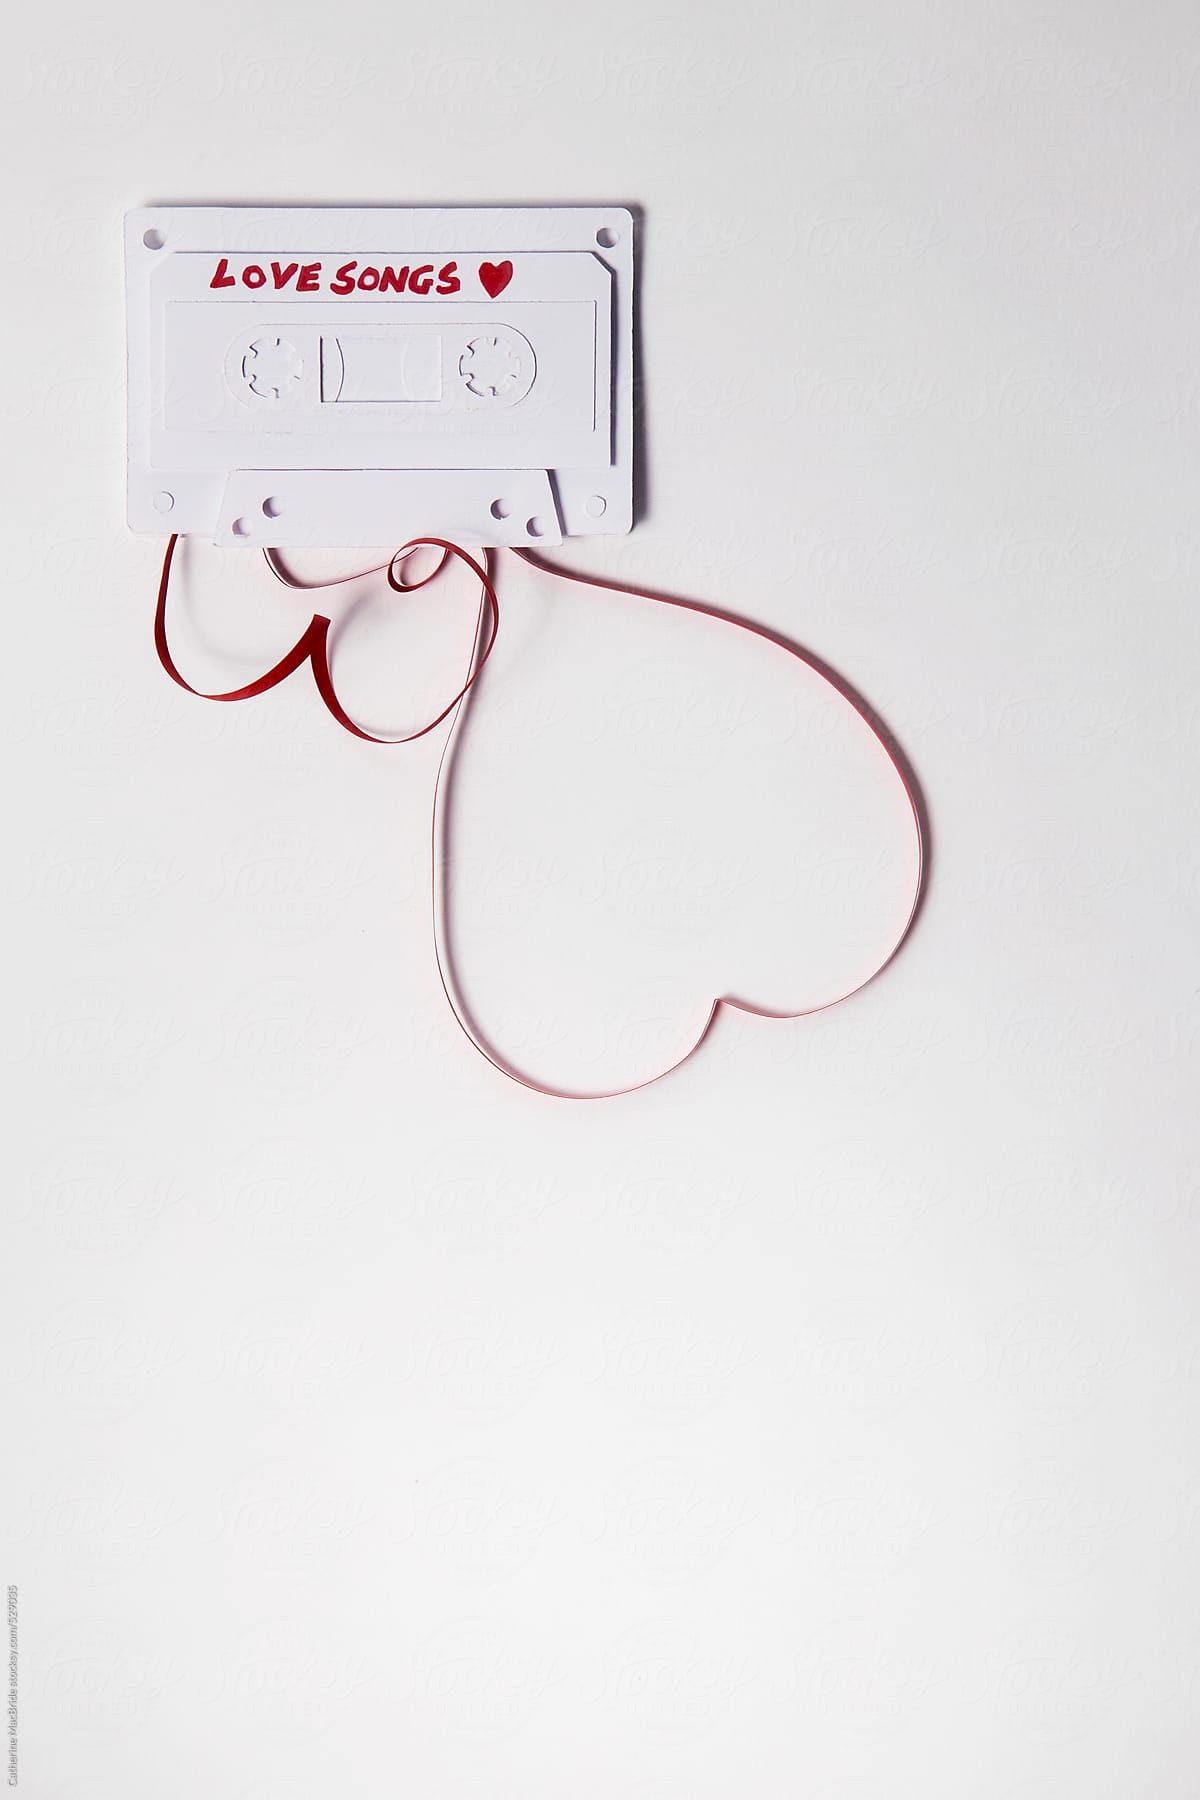 A white paper cassette tape with \